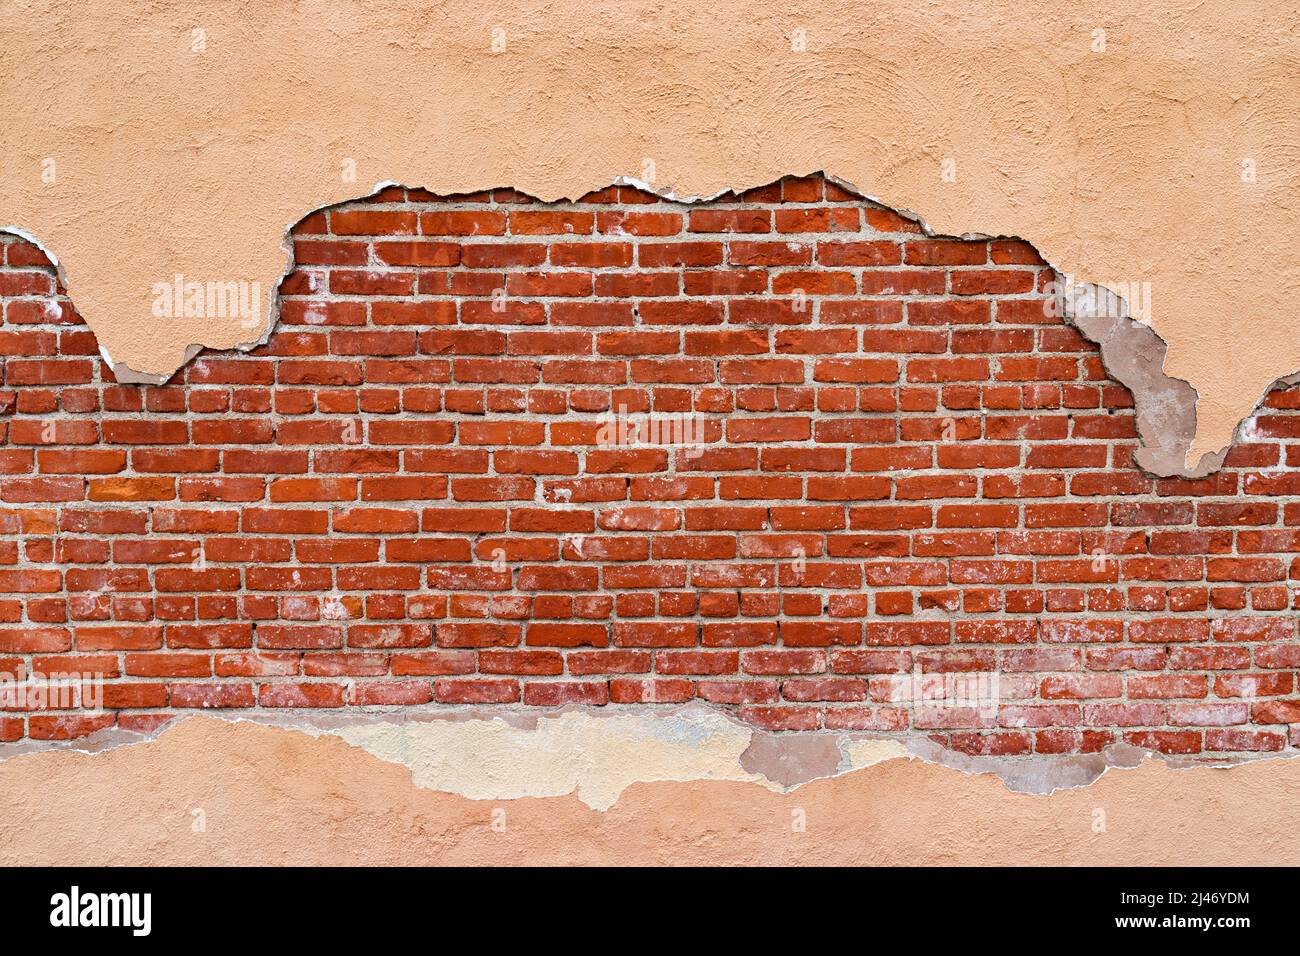 Brick wall background framed with stucco Stock Photo